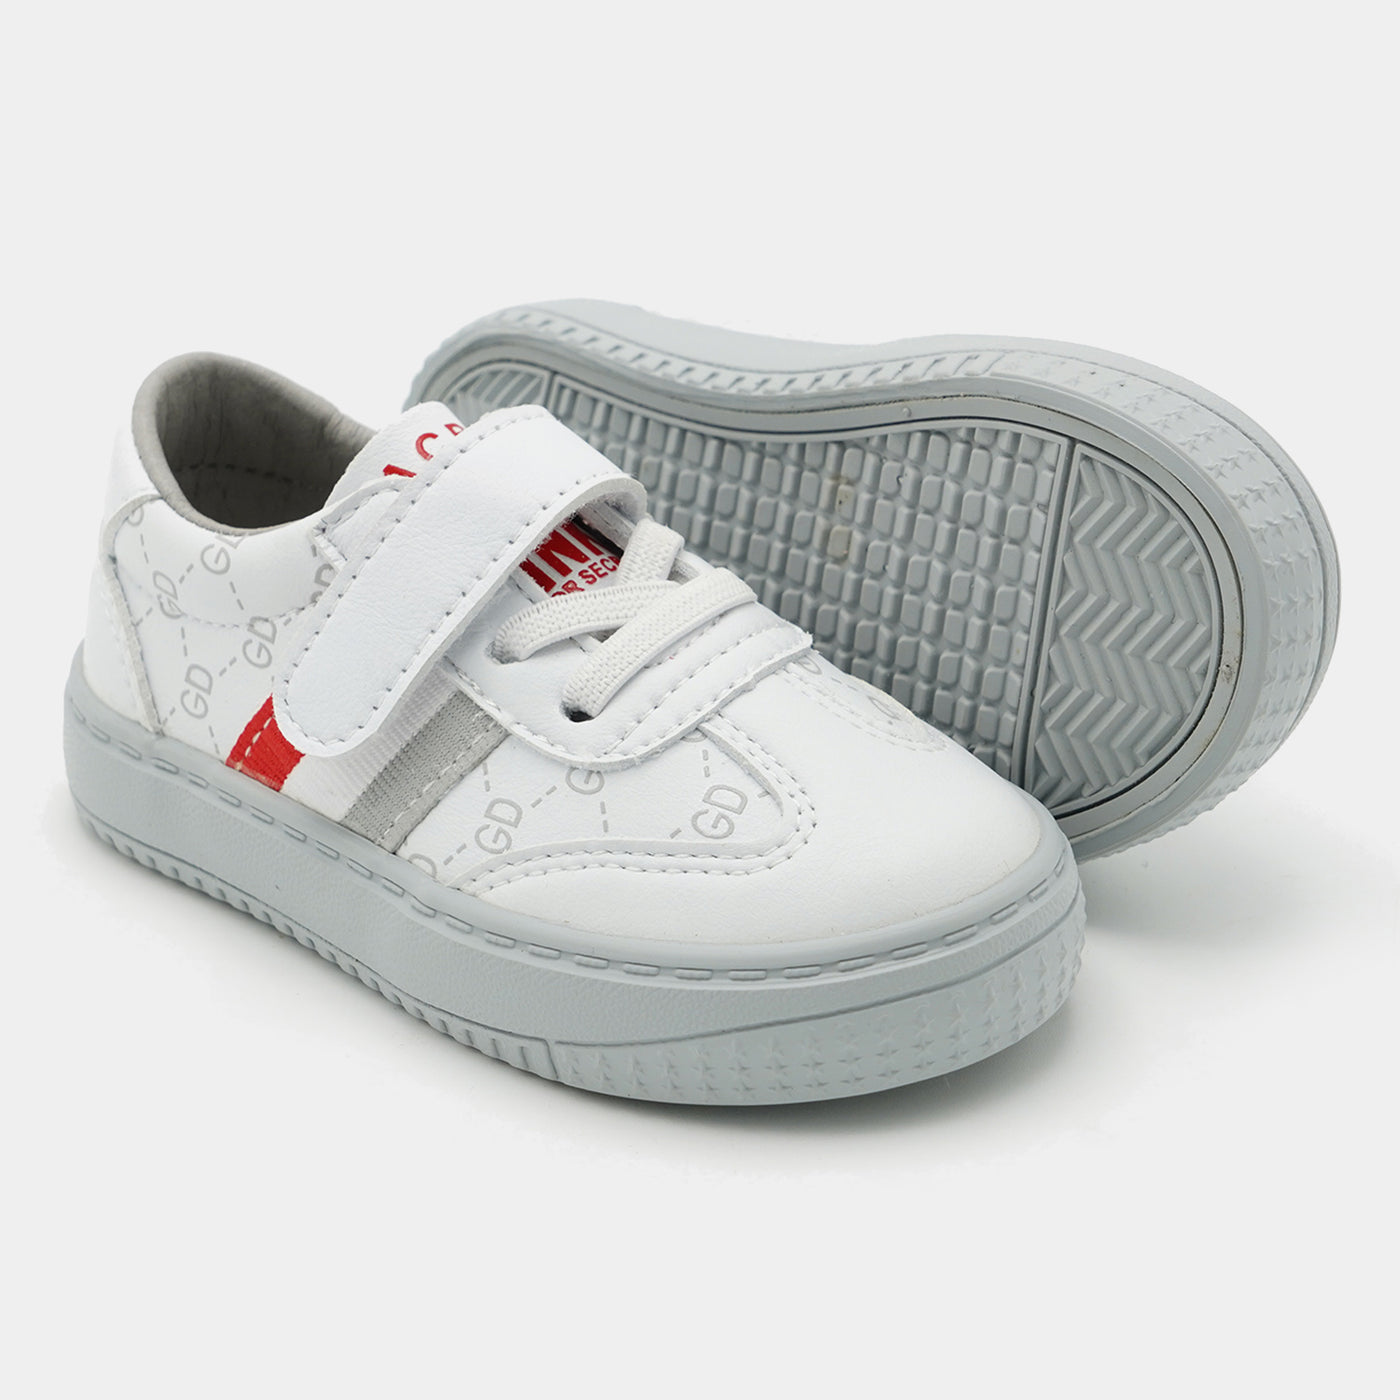 Girls Sneakers 2288C-White/Red